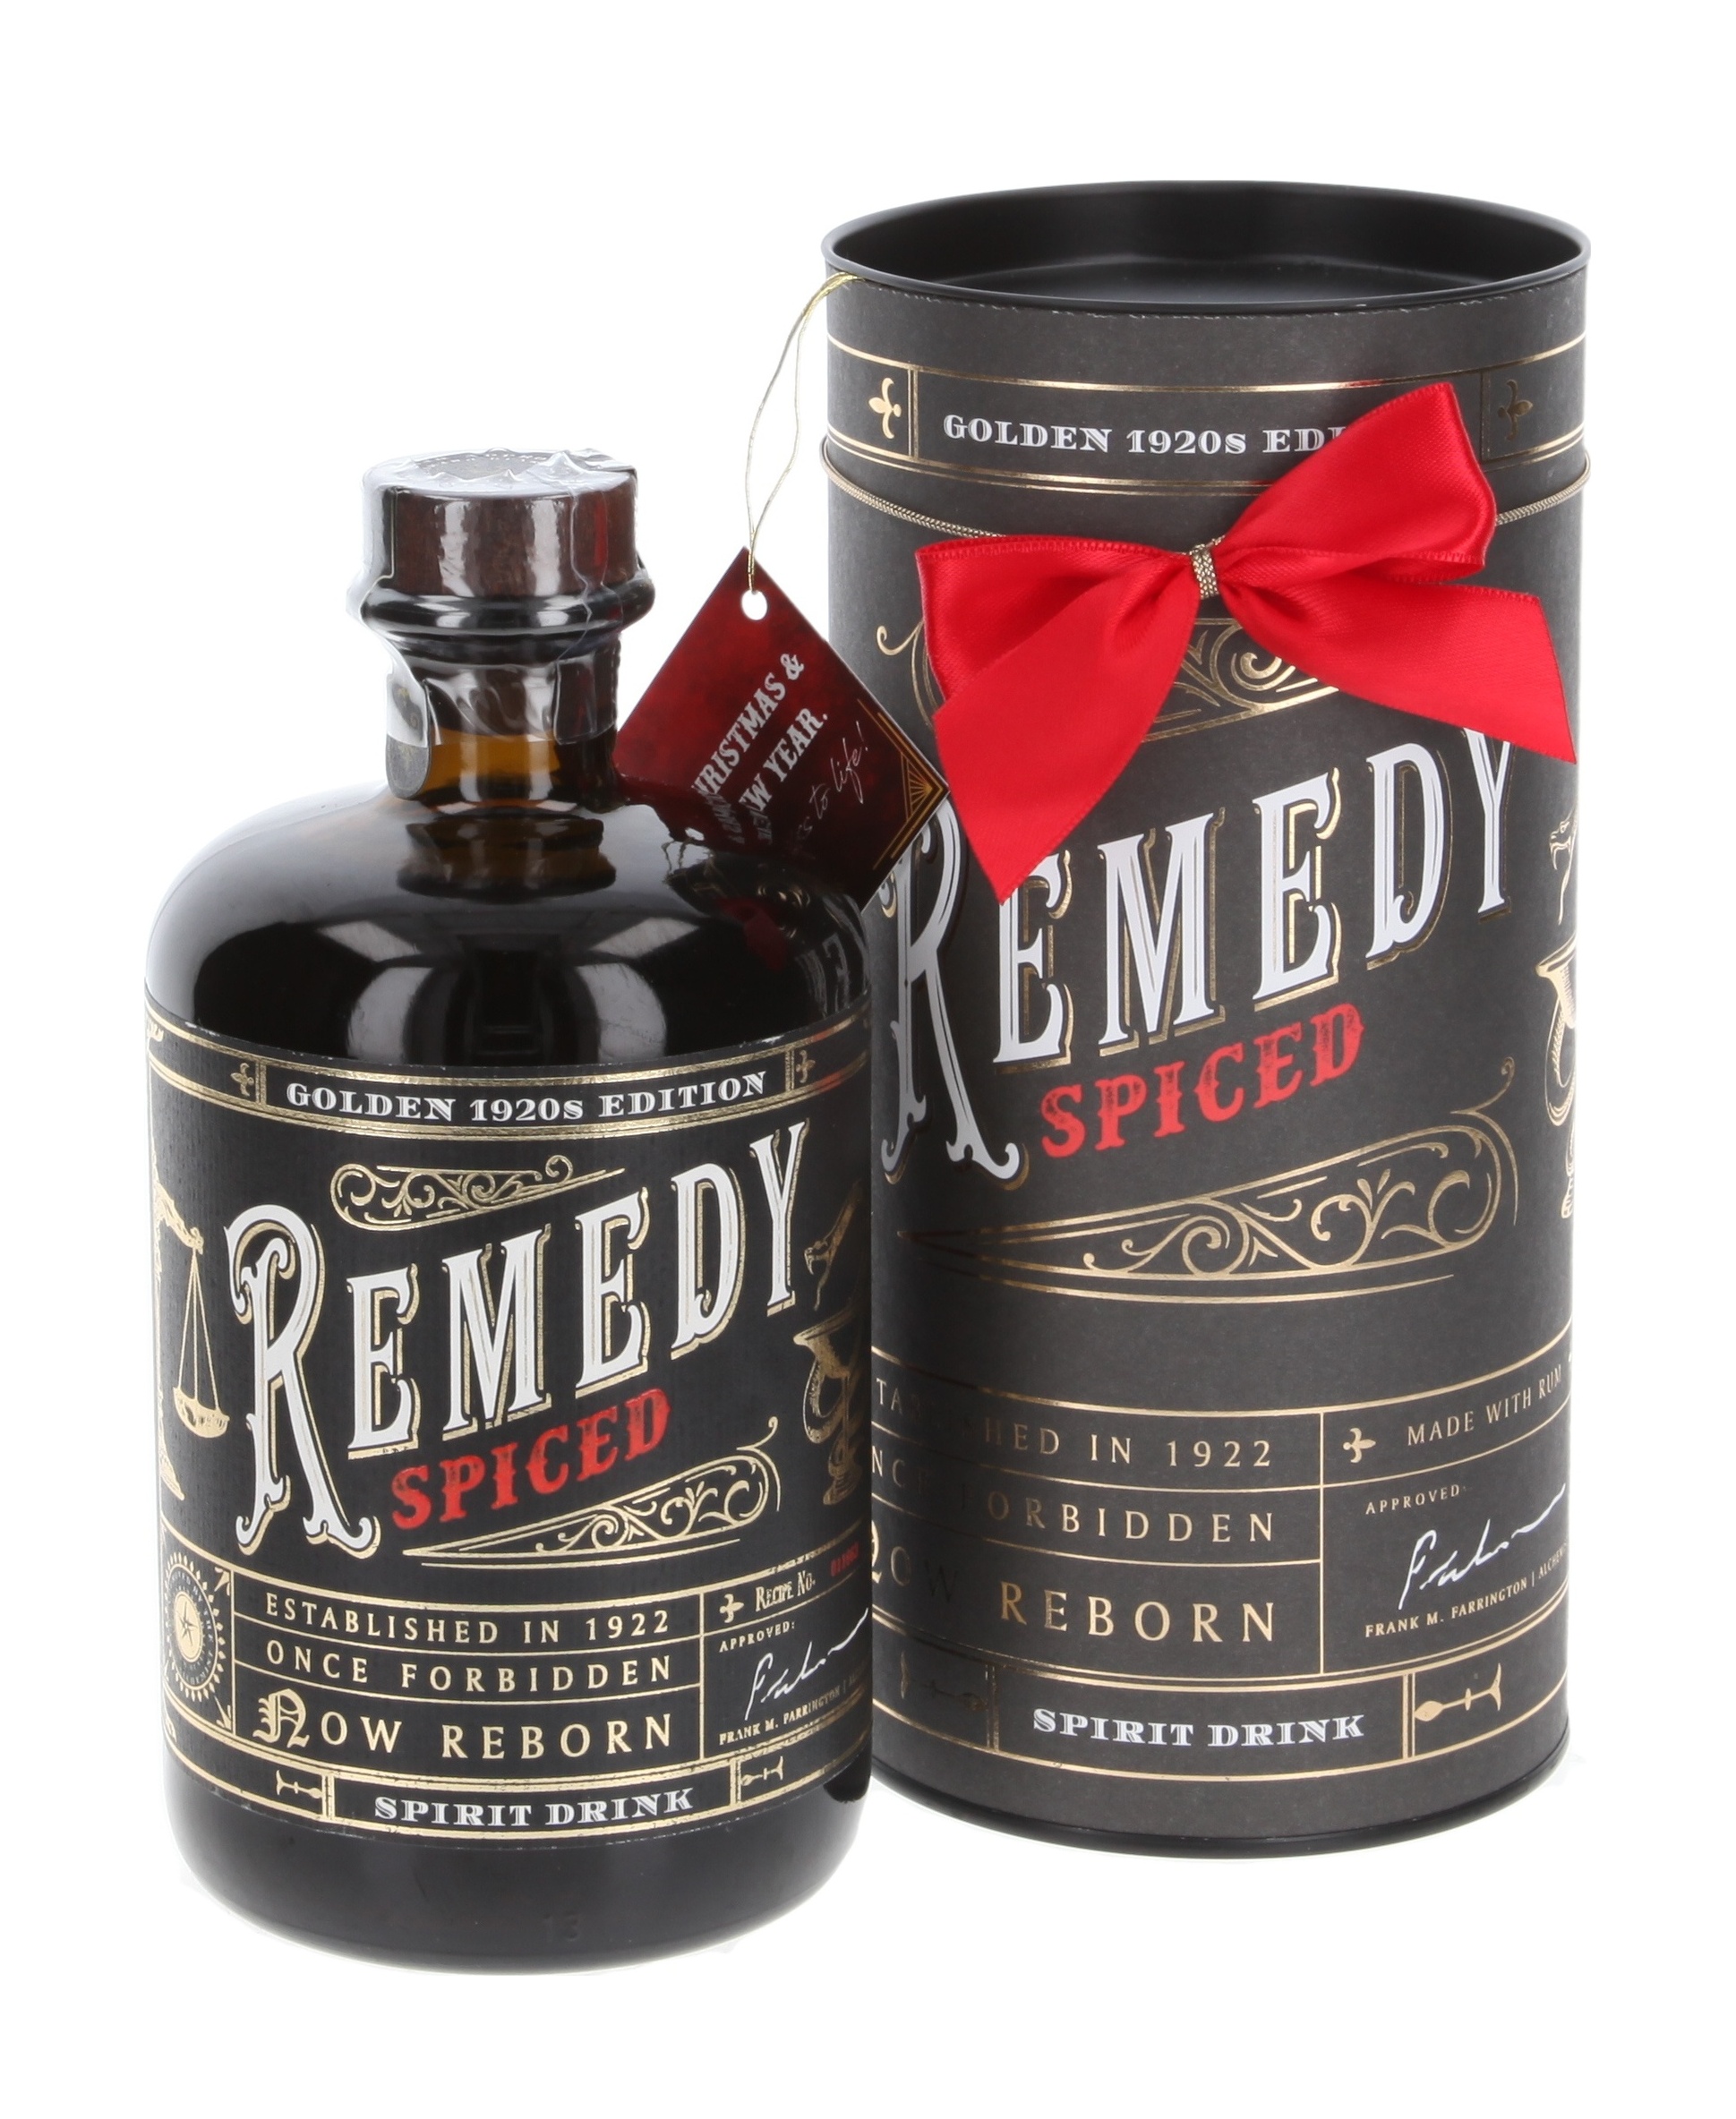 Remedy Spiced Rum | Whisky.de » To the online store